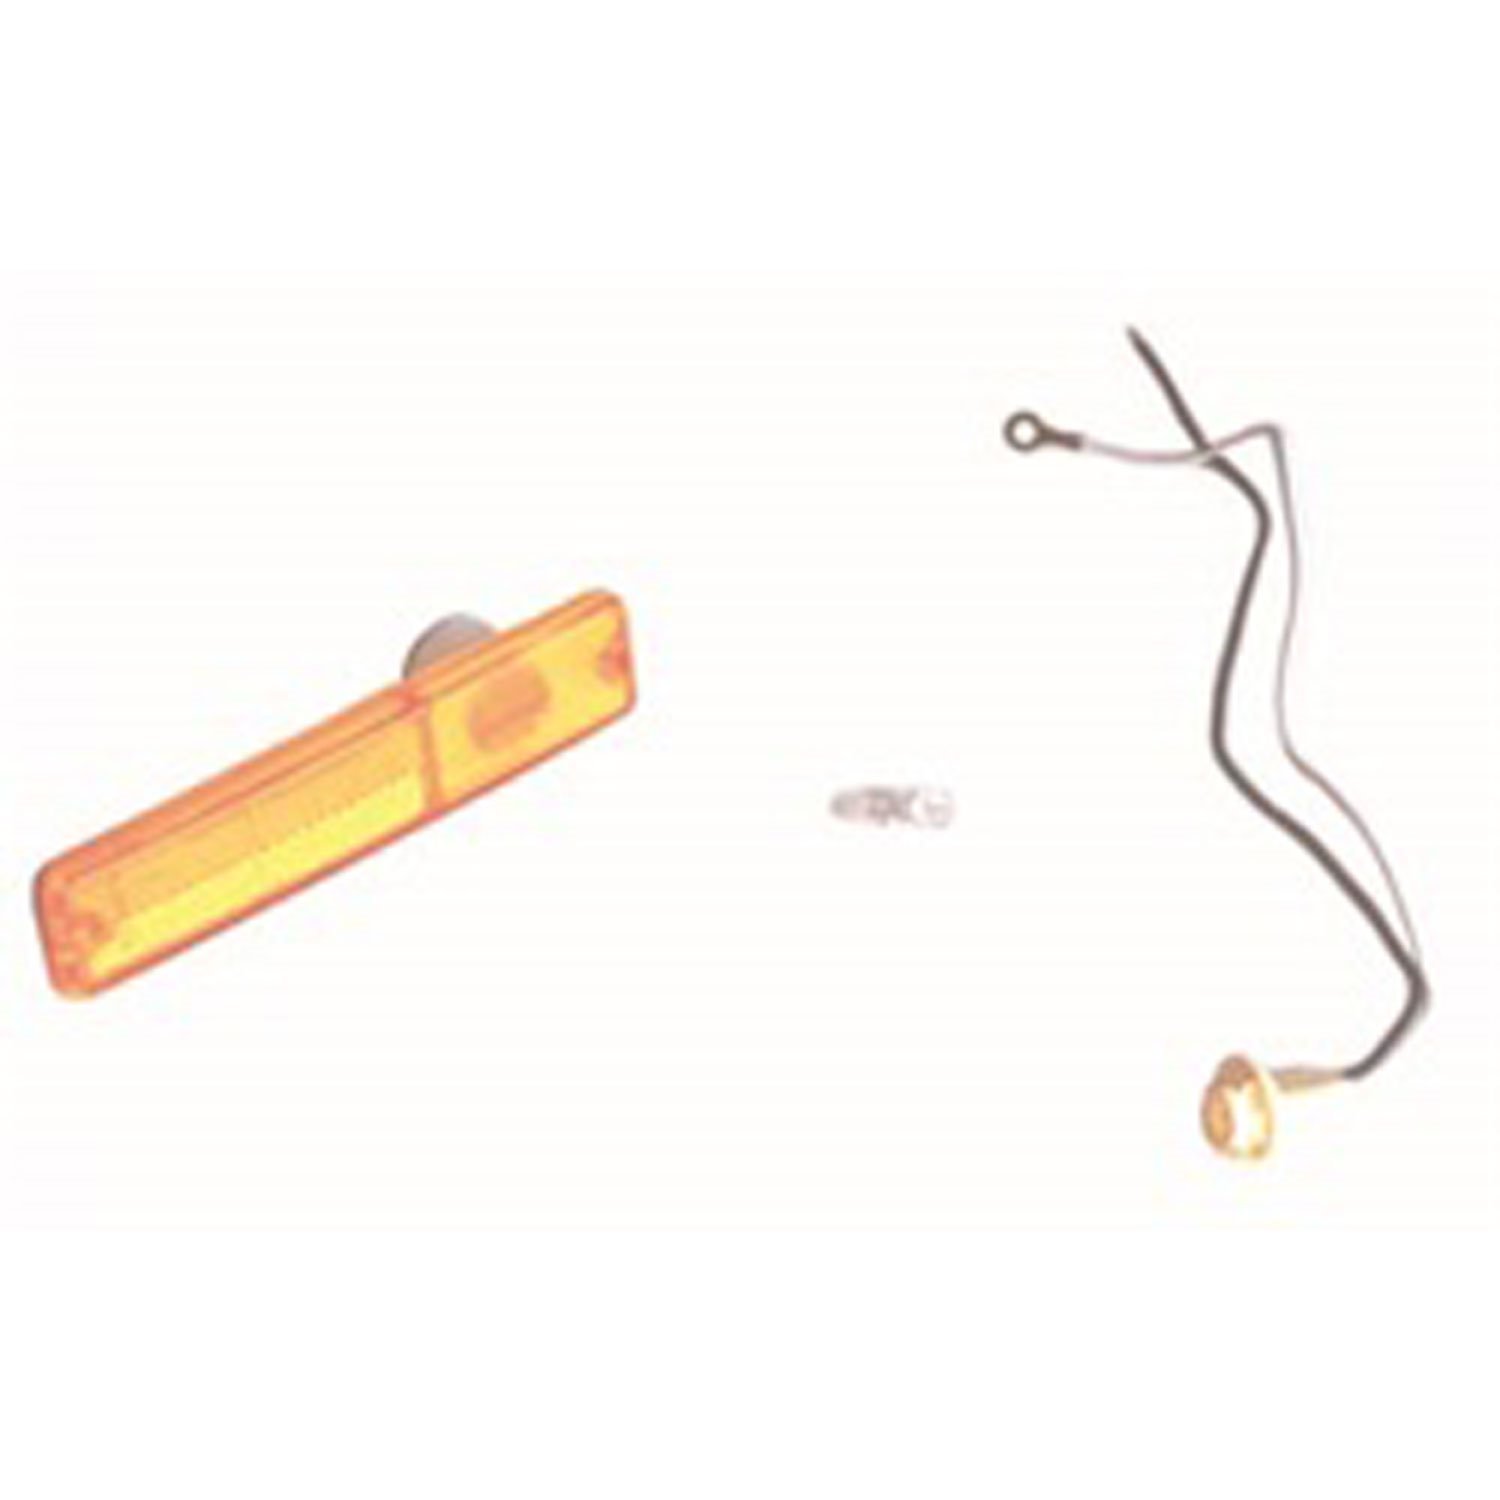 This amber side marker assembly from Omix-ADA fits